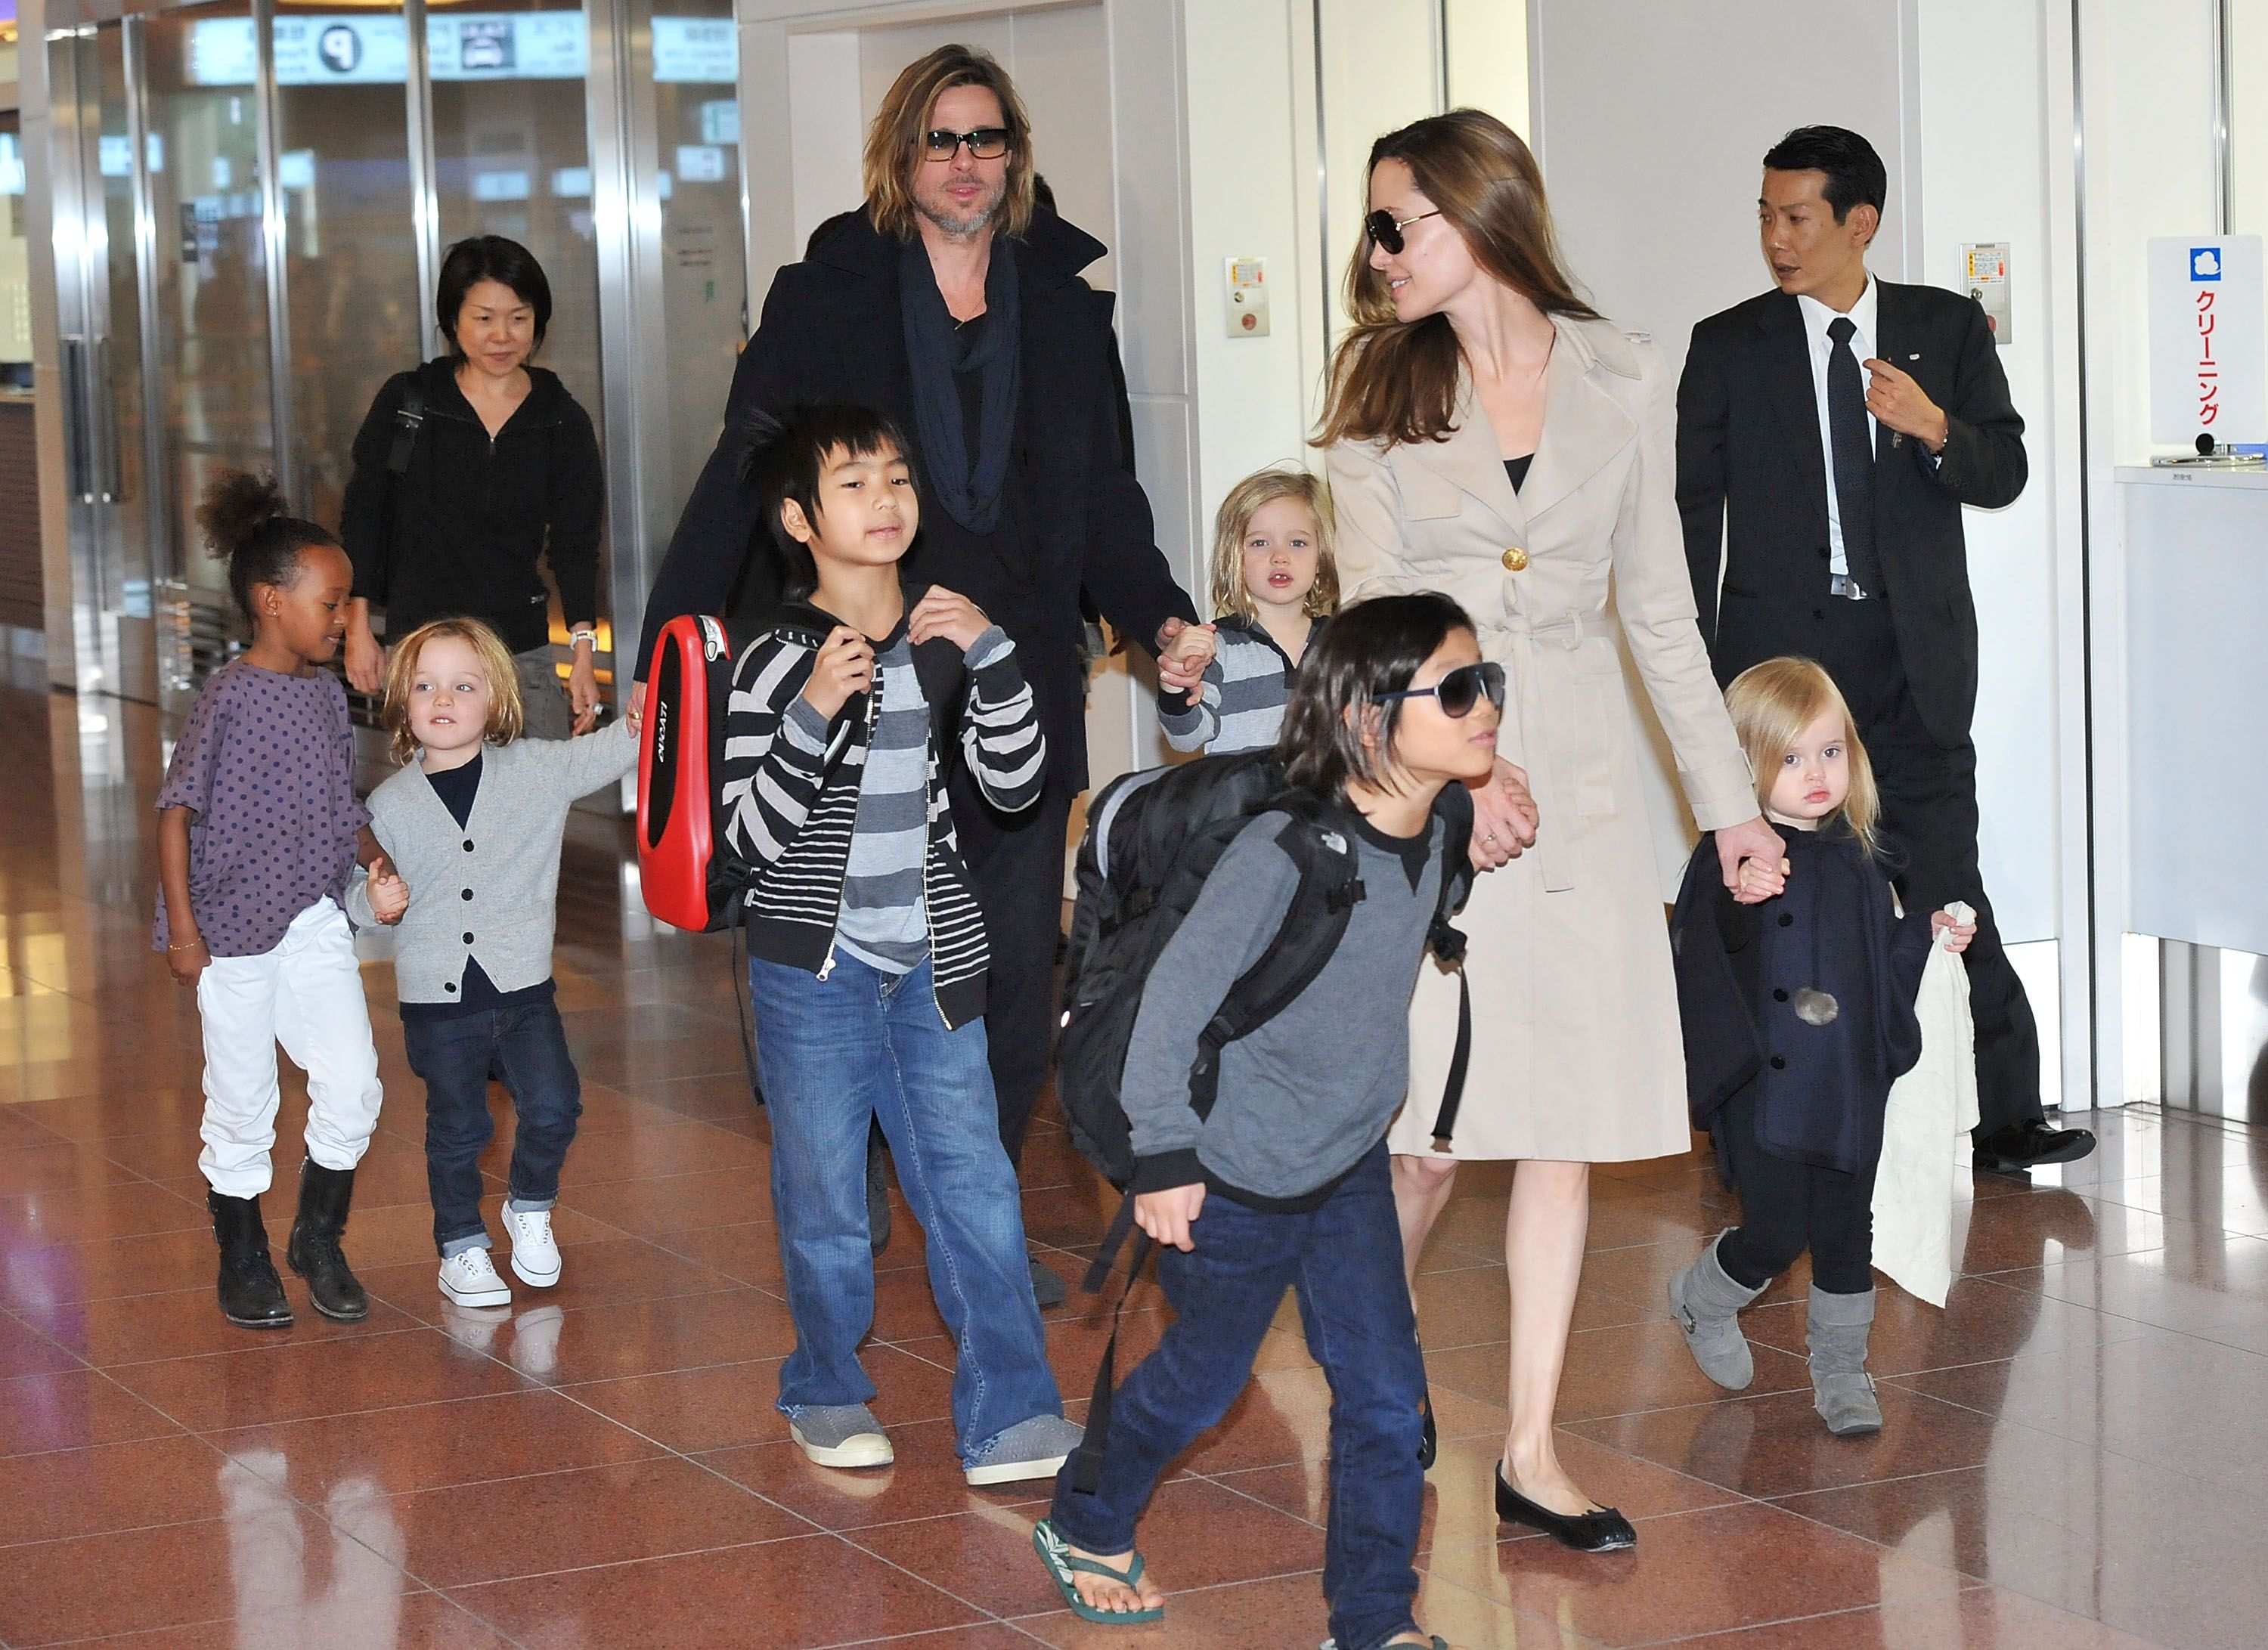 Brad Pitt, Angelina Jolie and their six children Maddox, Pax, Zahara, Shiloh, Knox, and Vivienne arrive at Haneda International Airport on November 8 in Tokyo, Japan on November 08, 2011. | Source: Getty Images